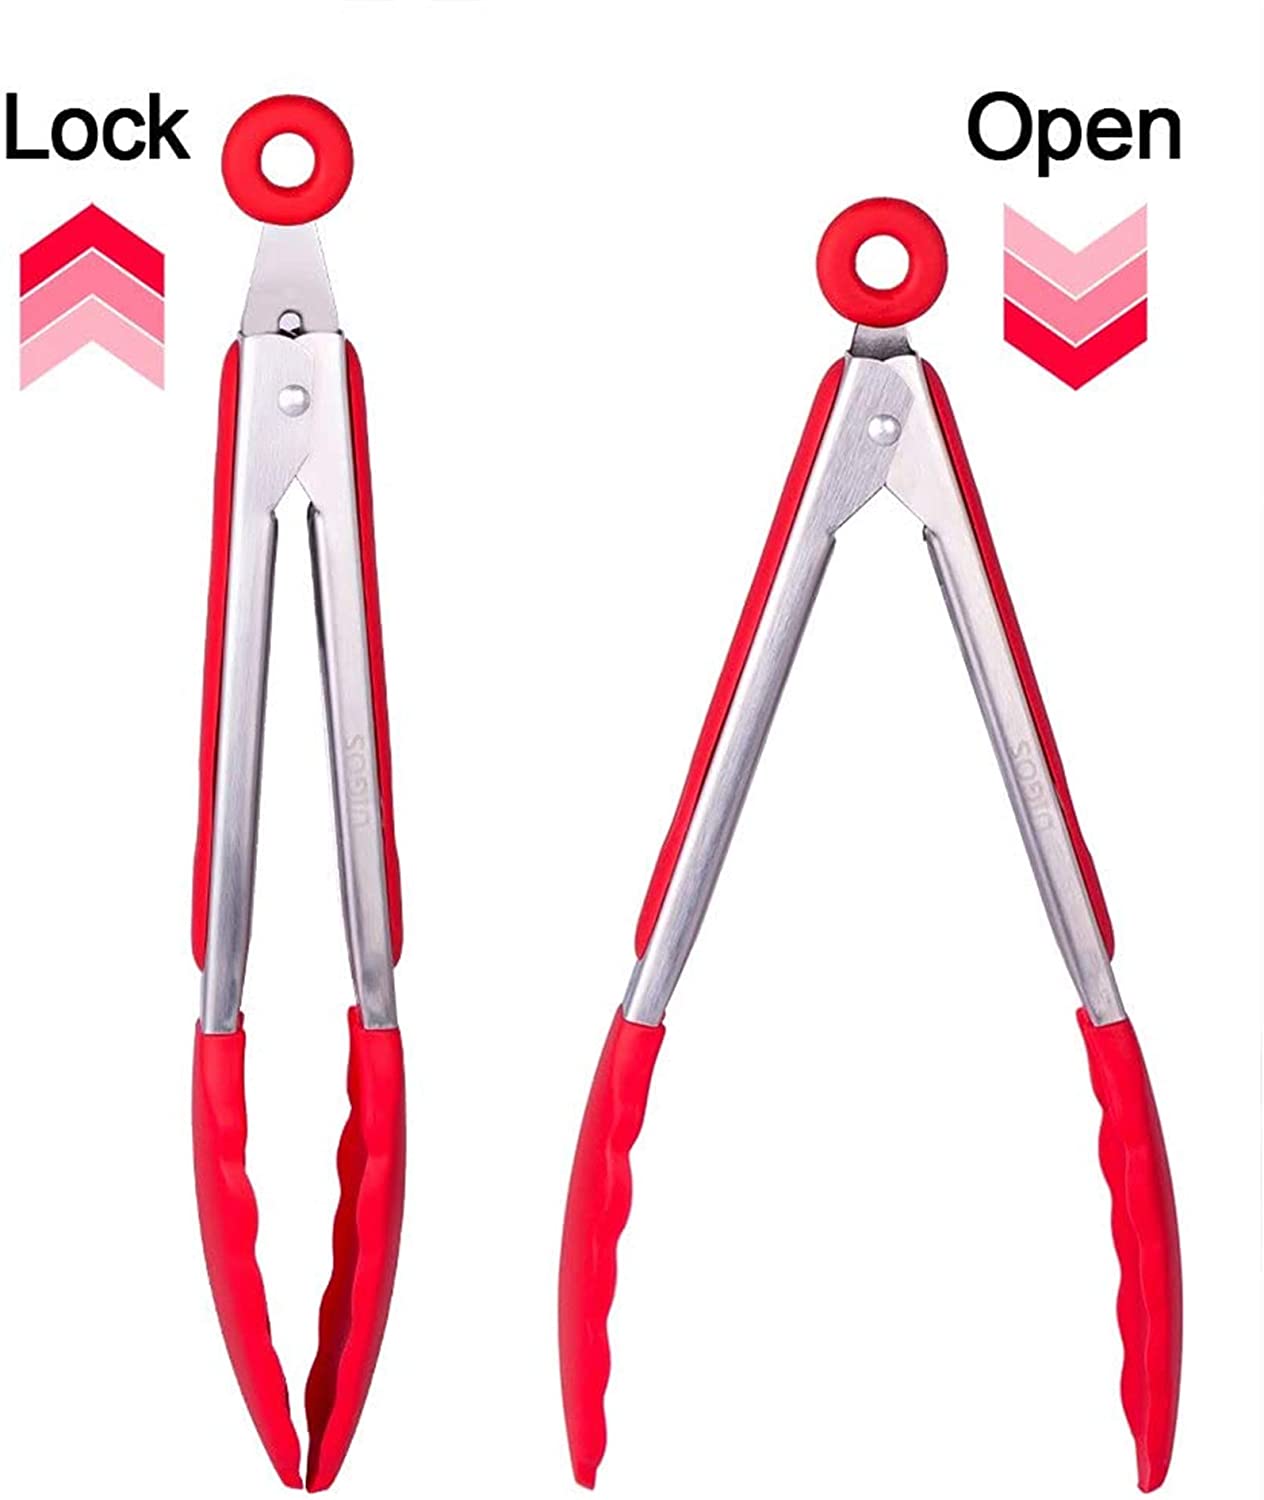 34cm Red Silicone Tongs